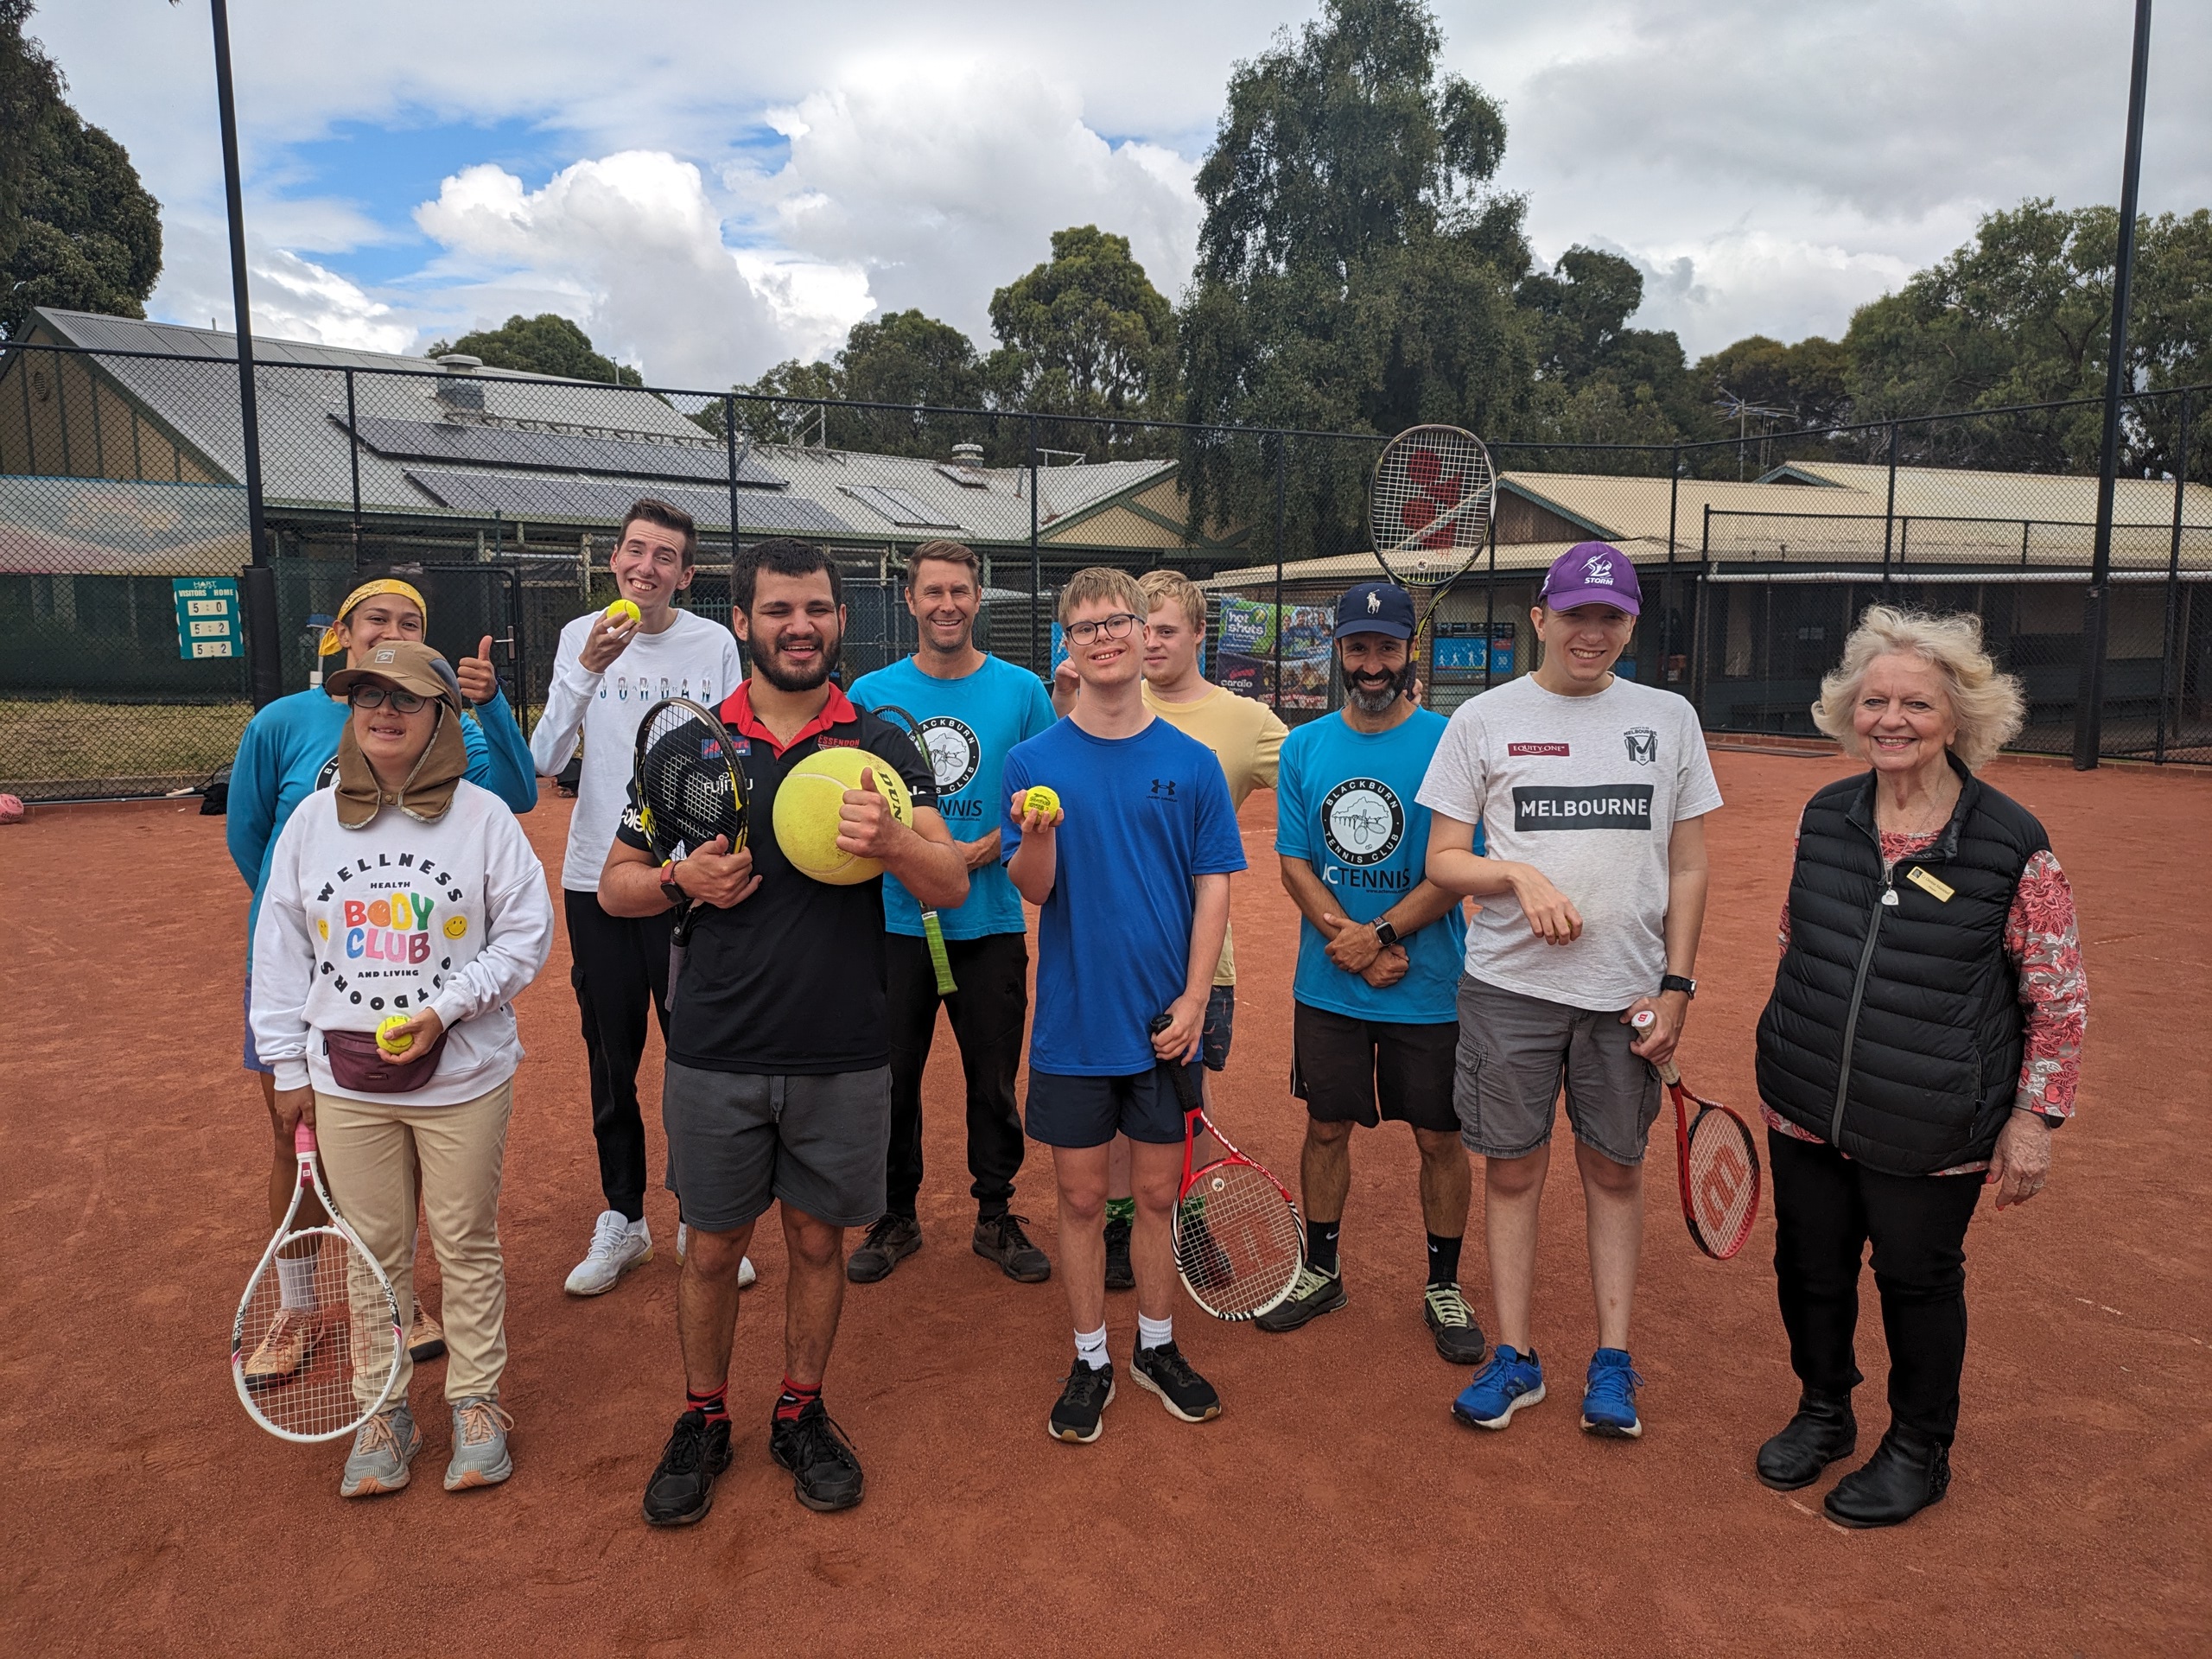 Cr Massoud with players at the Blackburn Tennis Club as part of its all abilities program.